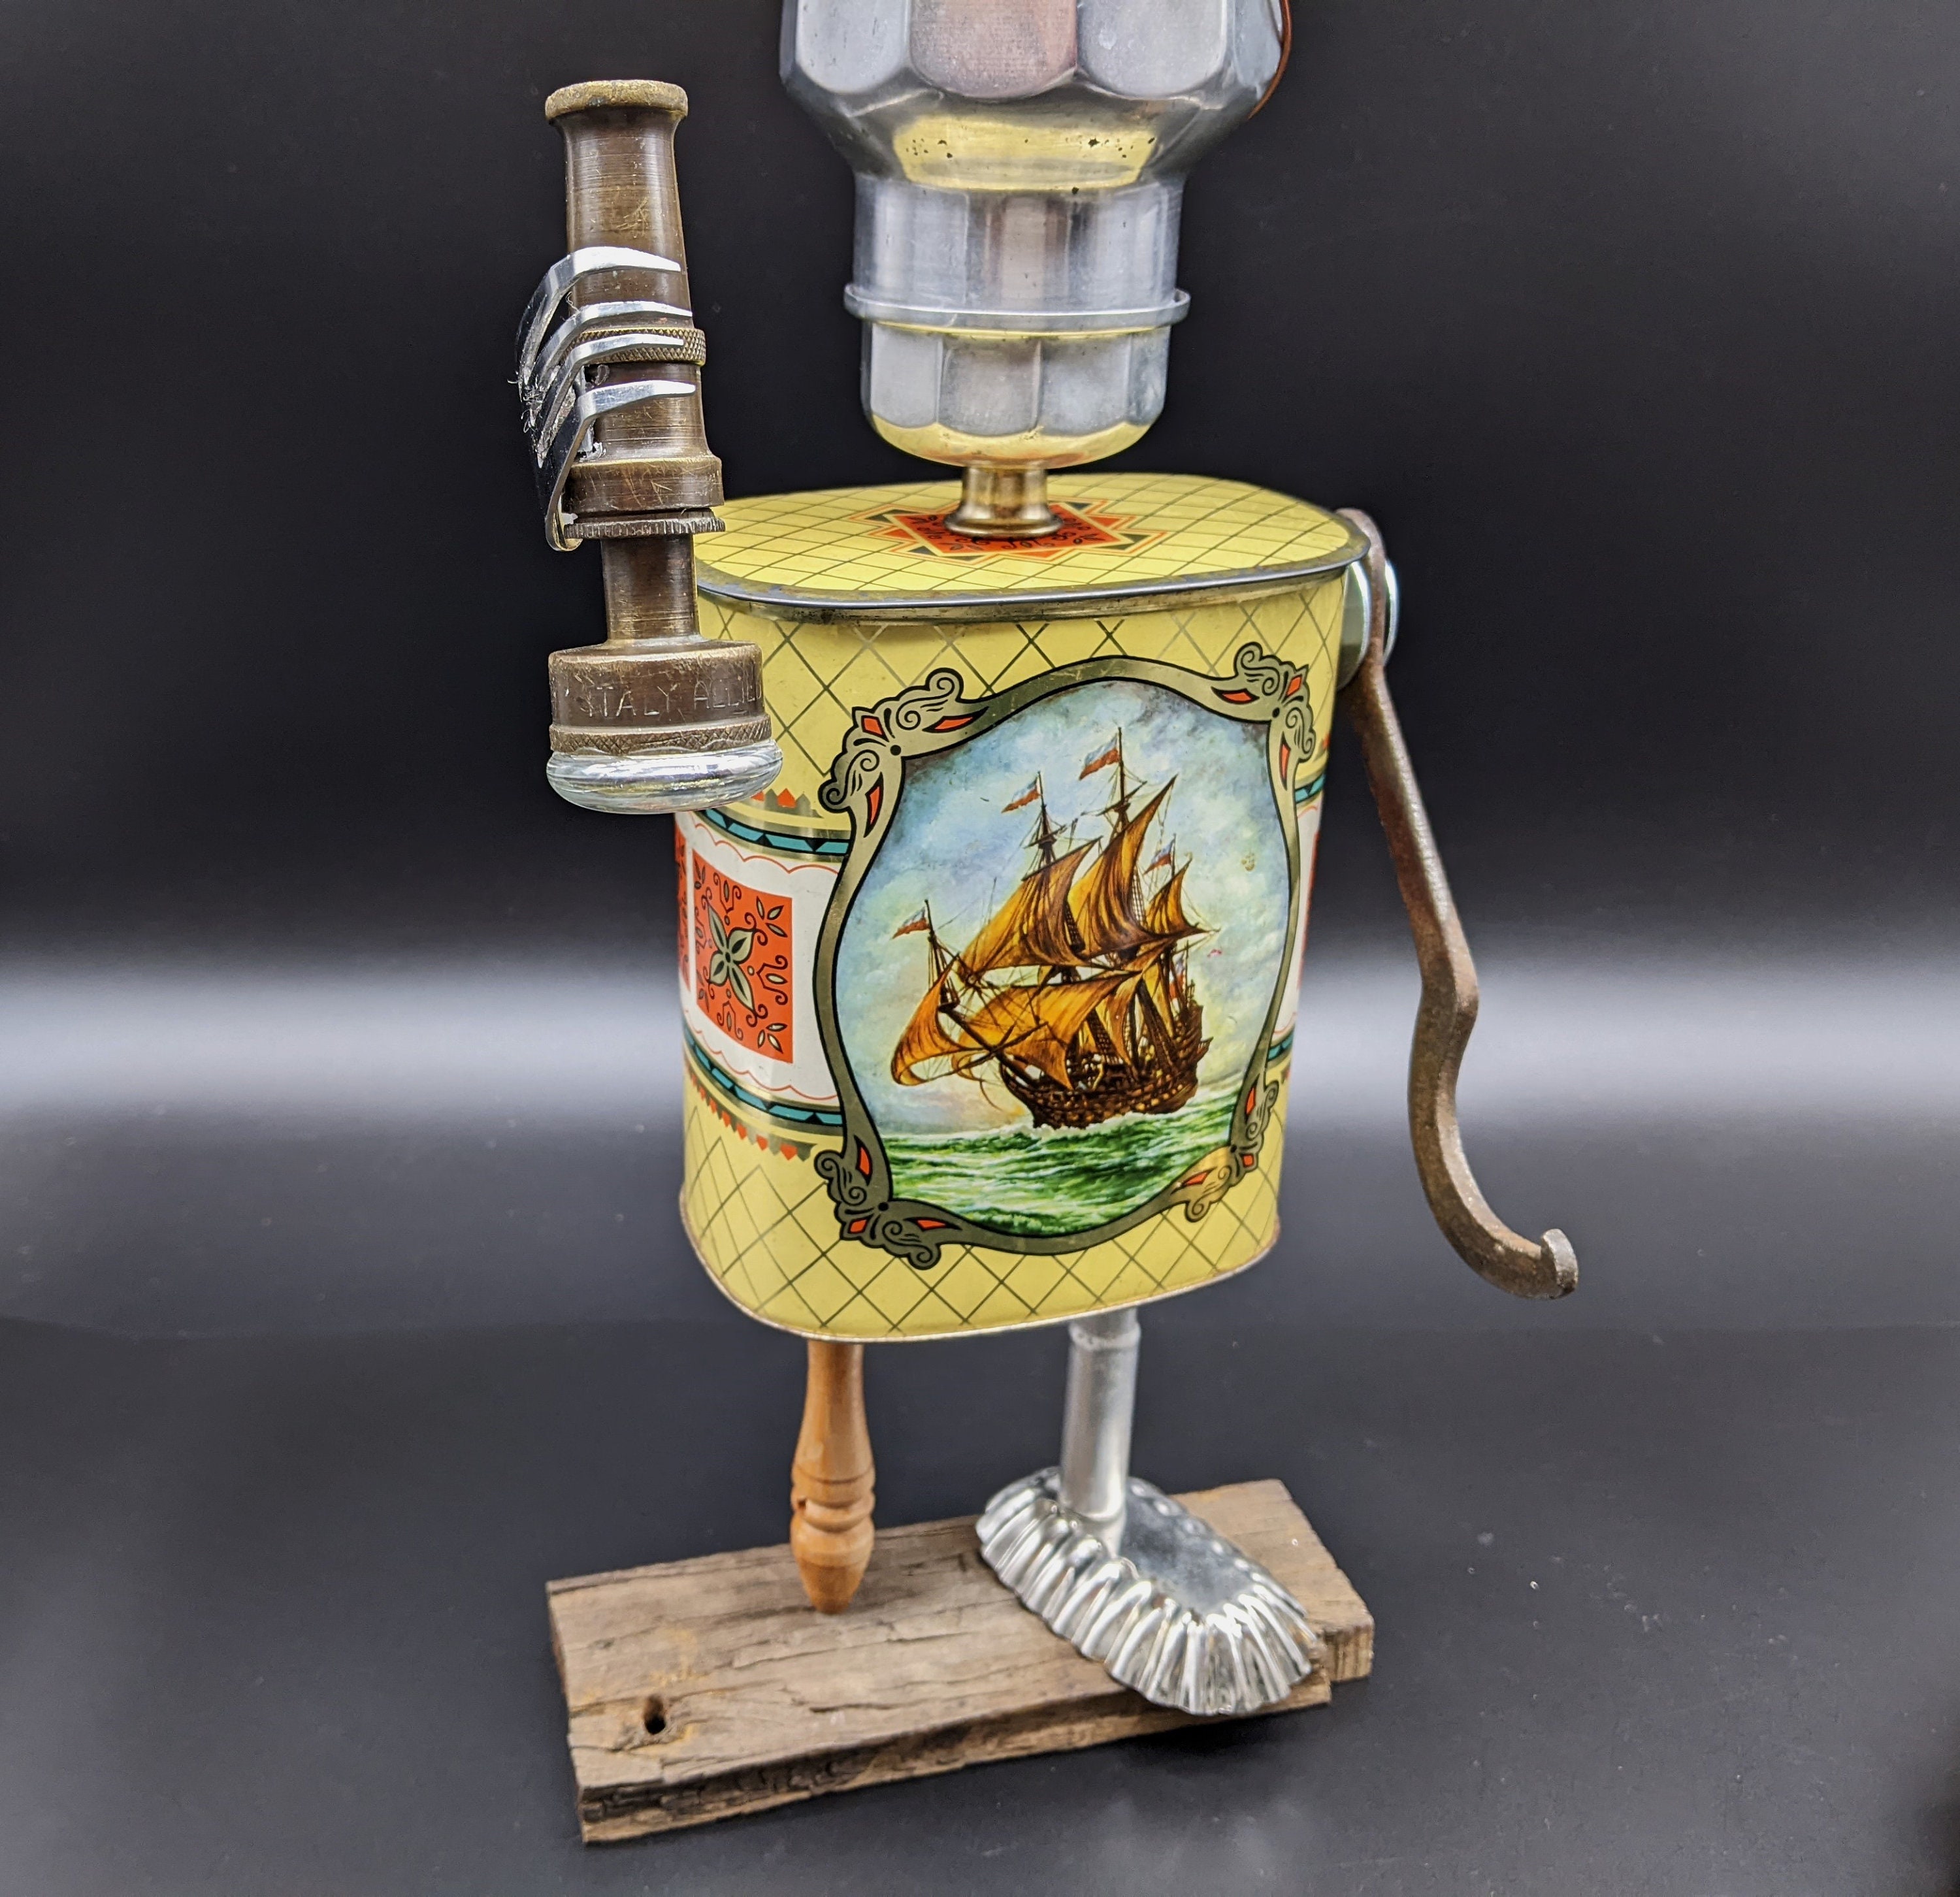 Found Object Pirate Robot Assemblage Art Sculpture Upcycled Repurposed Art  Unique Urn Pirate With Telescope and Treasure Chest 